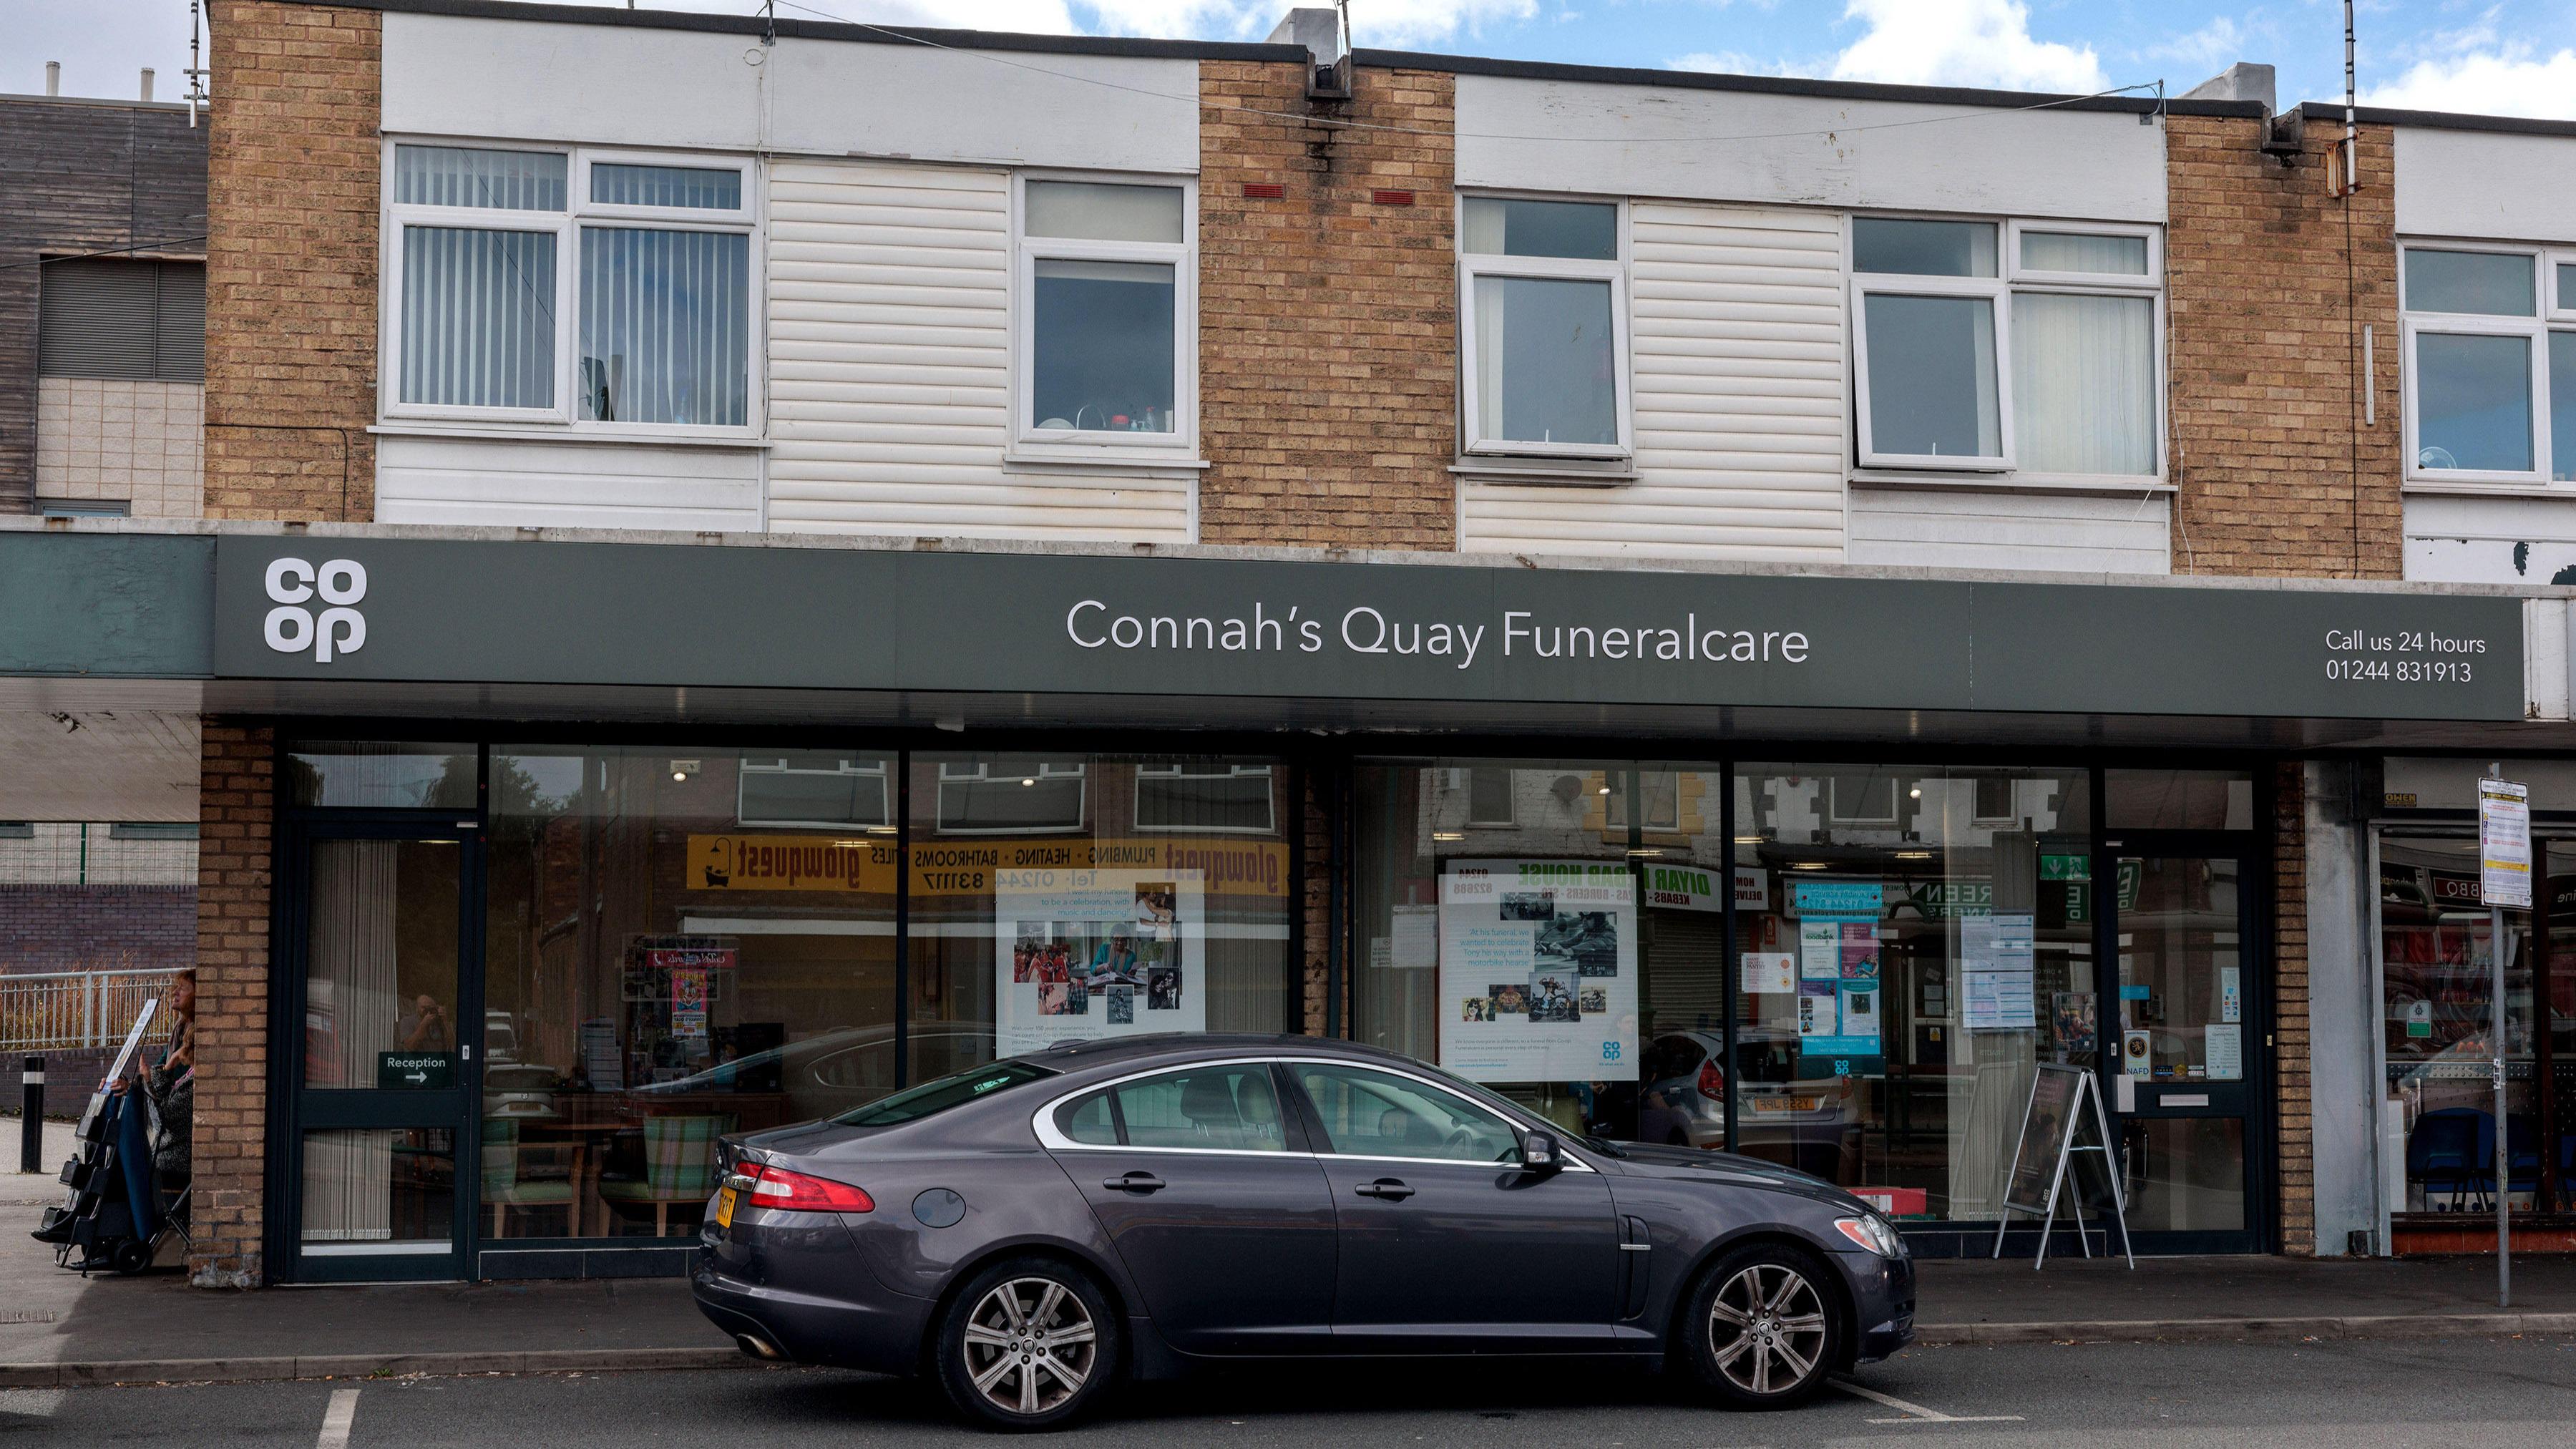 Images Connah's Quay Funeralcare